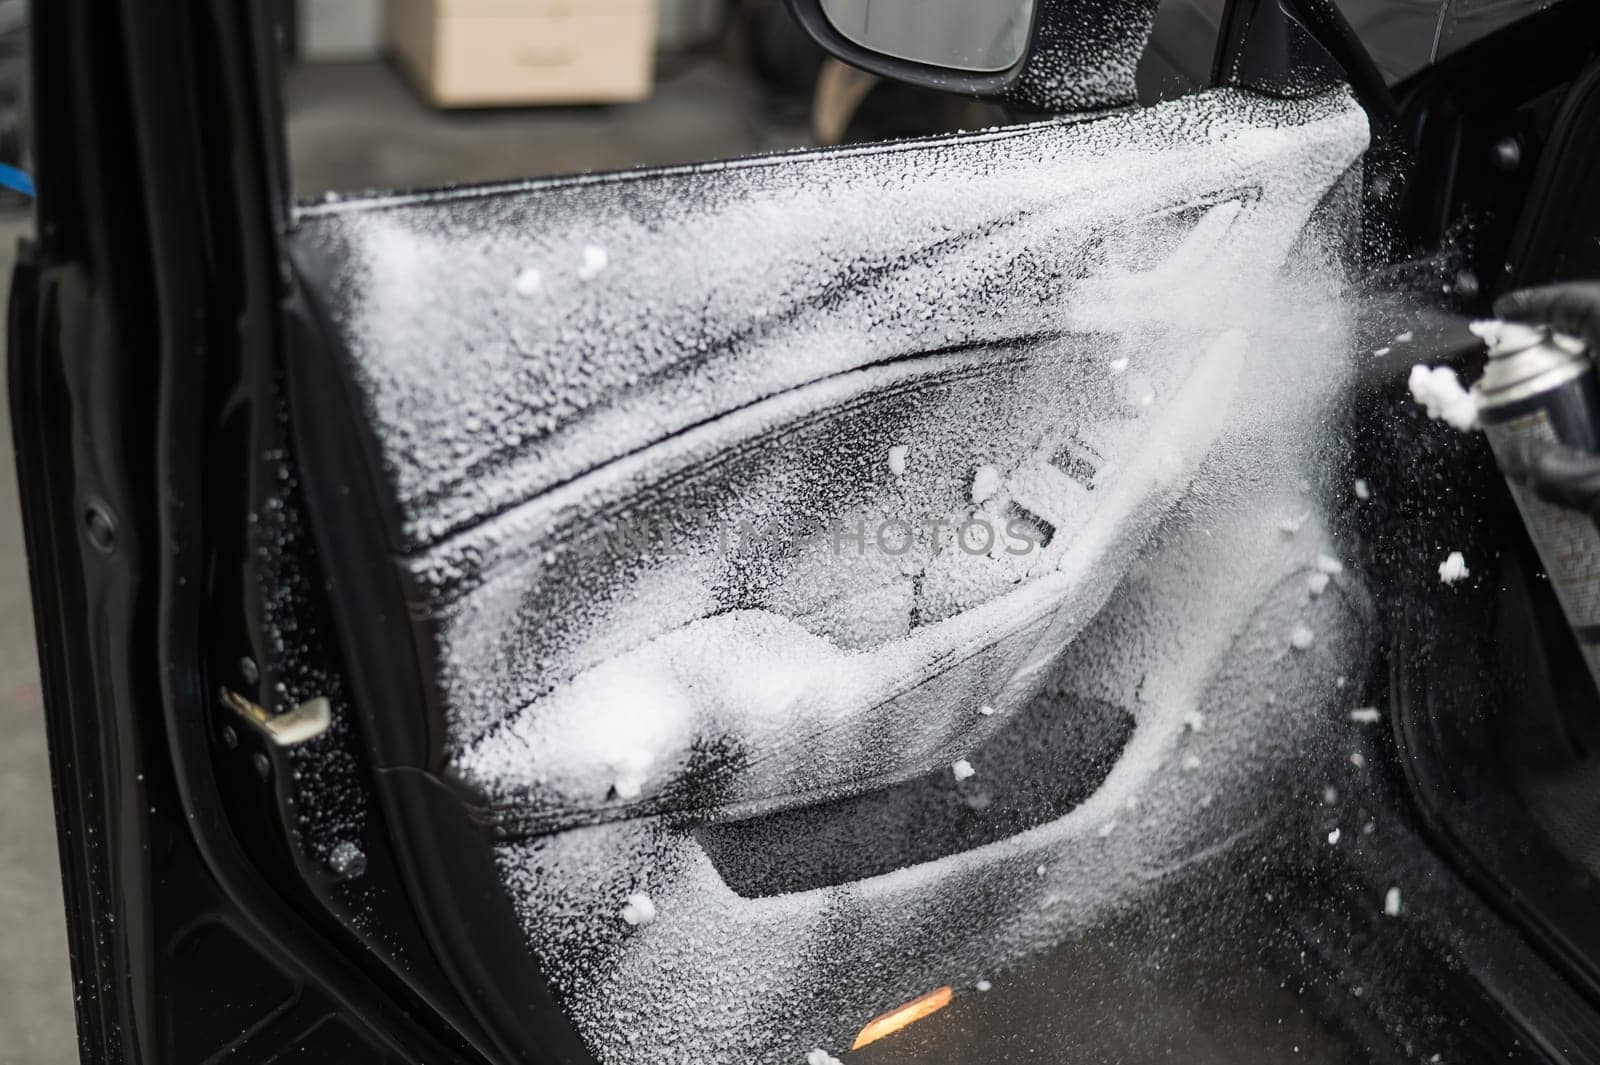 A man sprays cleaning foam on the interior of a car. by mrwed54